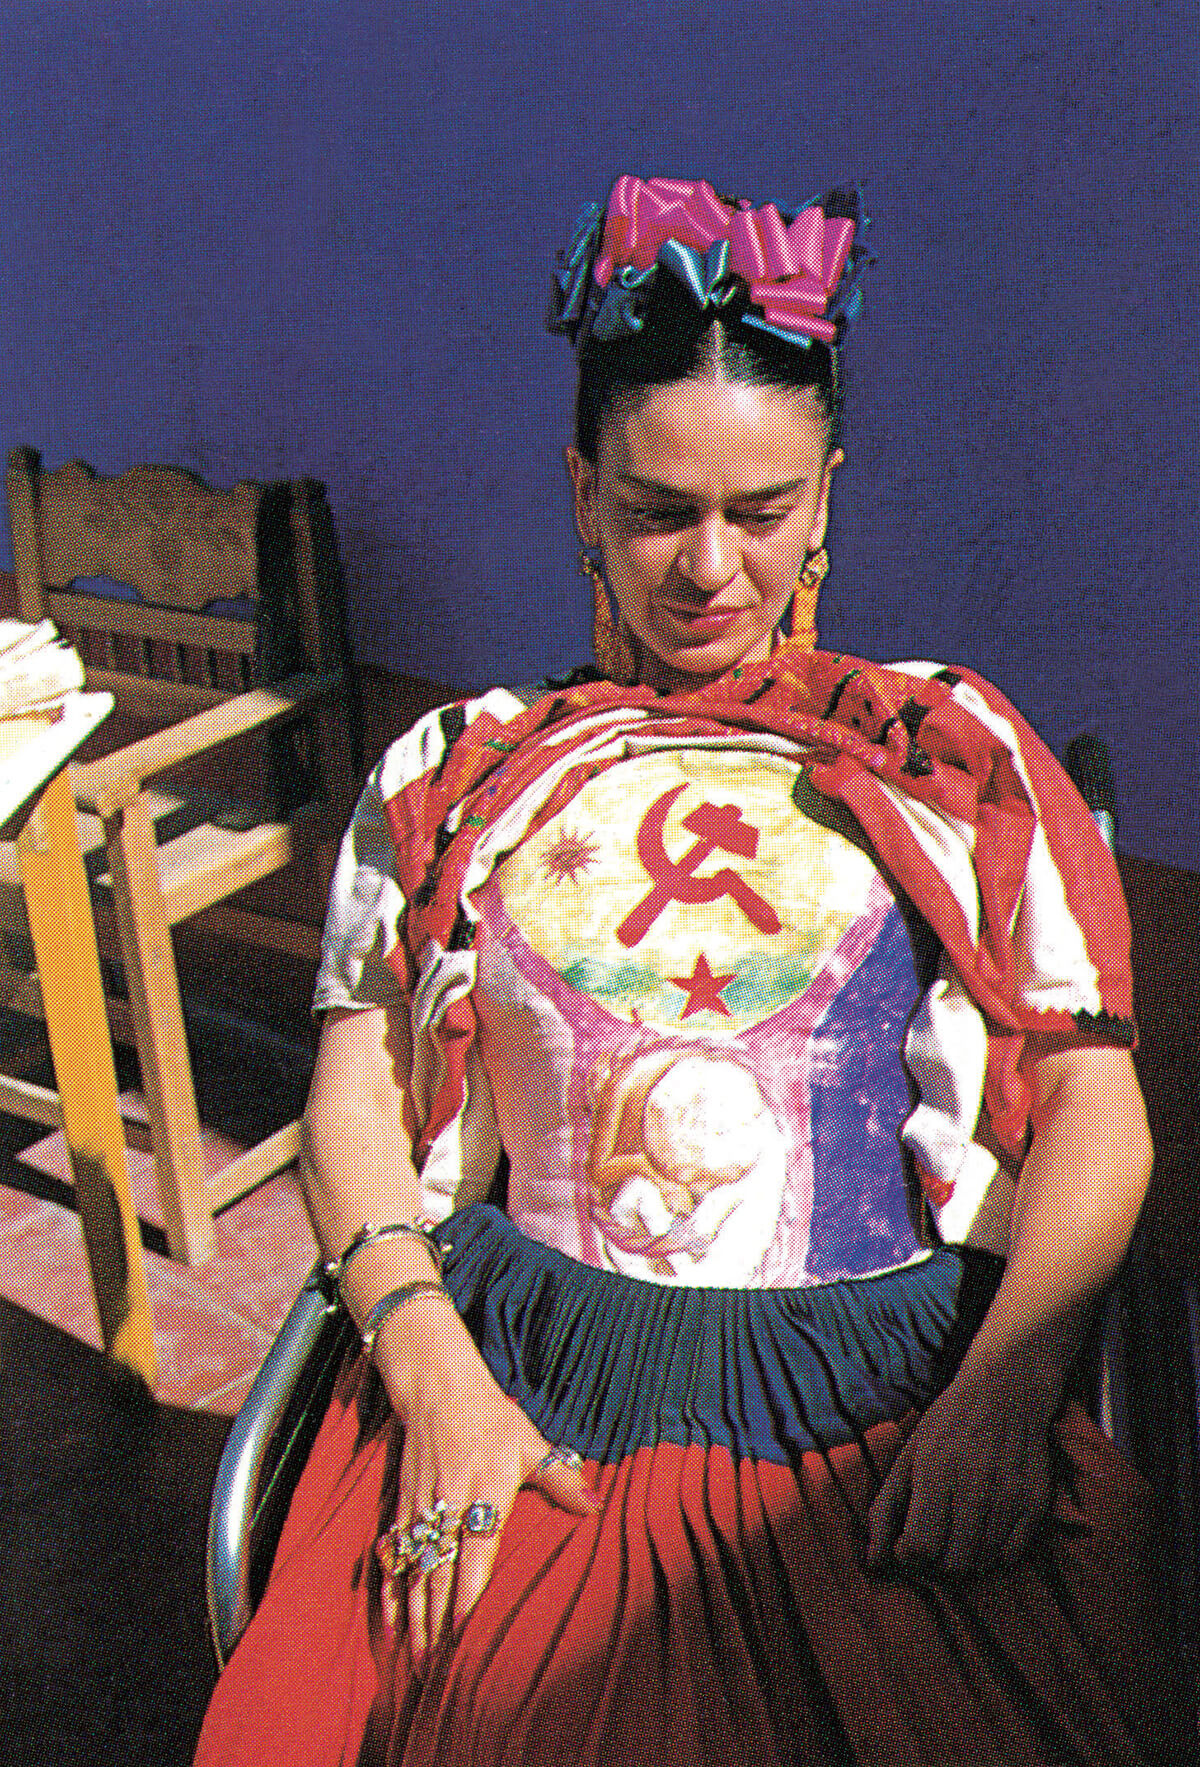 A 1951 portrait of Frida Kahlo by Florence Arquin.